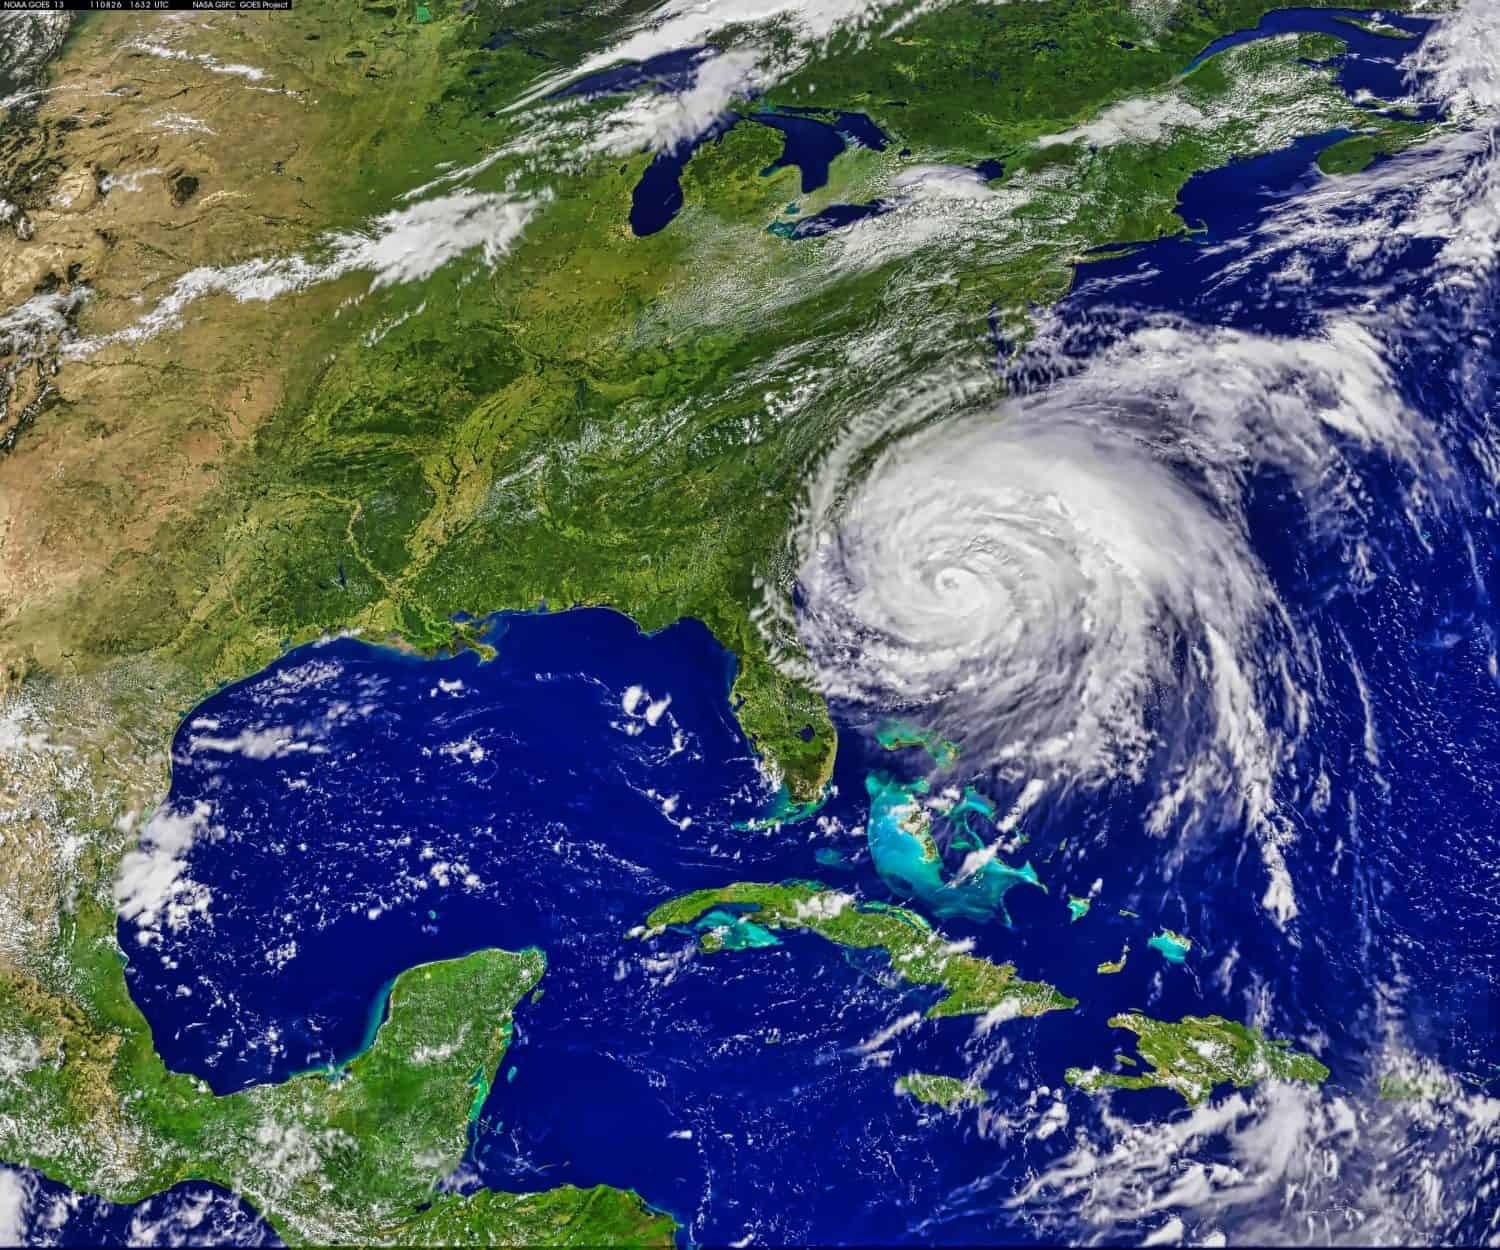 Hurricane Irene Nears Landfall. Irene, the first hurricane of the 2011 Atlantic season, was poised on August 26 to be the first to make landfal Elements of this image furnished by NASA.